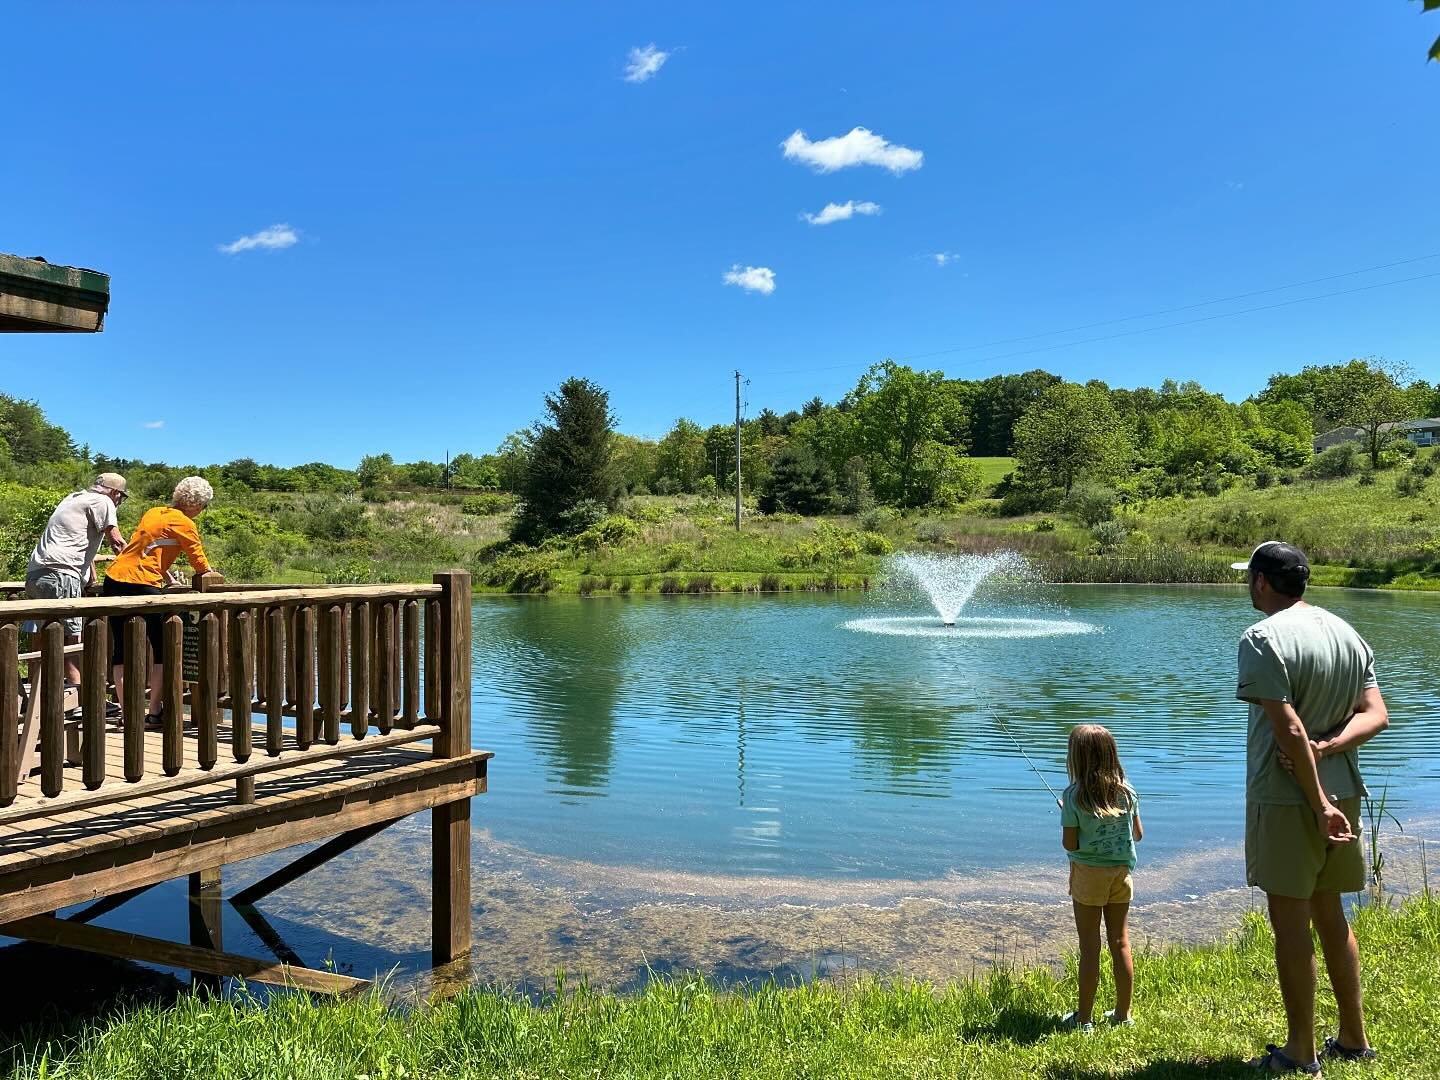 Staying at River Rock Lodge is like renting your own private nature preserve for the week! Enjoy long walks throughout the trails, fishing at the pond, a game of basketball, and evenings by the fire! 

#hockinghills #cabin #vrbo #vrbotogether #myhock